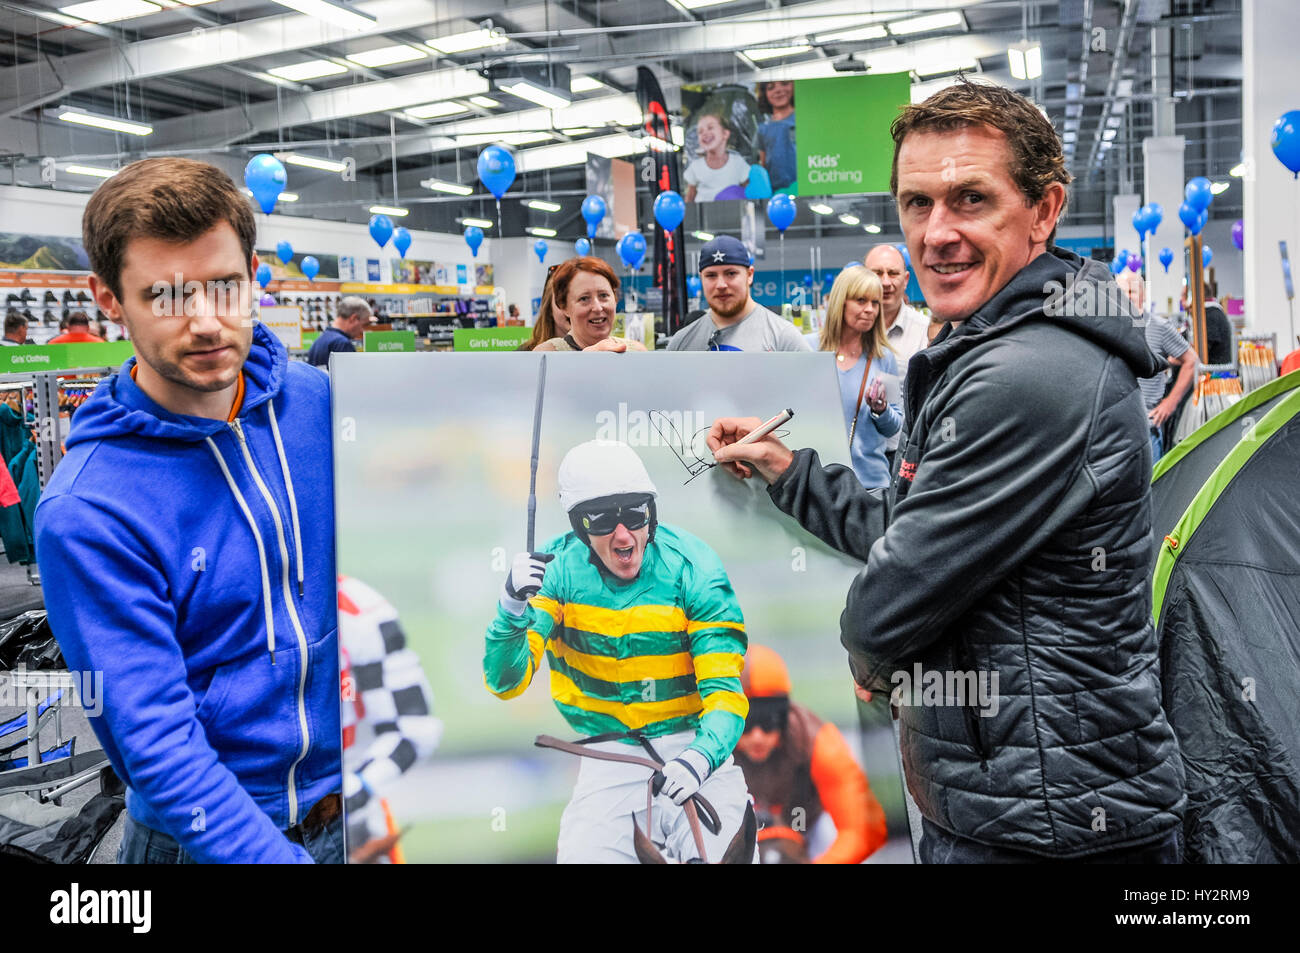 NEWTOWNABBEY, NORTHERN IRELAND. 14 MAY 2016 - Champion Jockey AP McCoy signs a portrait of him as he opens the first Go Outdoors store in Ireland. Stock Photo